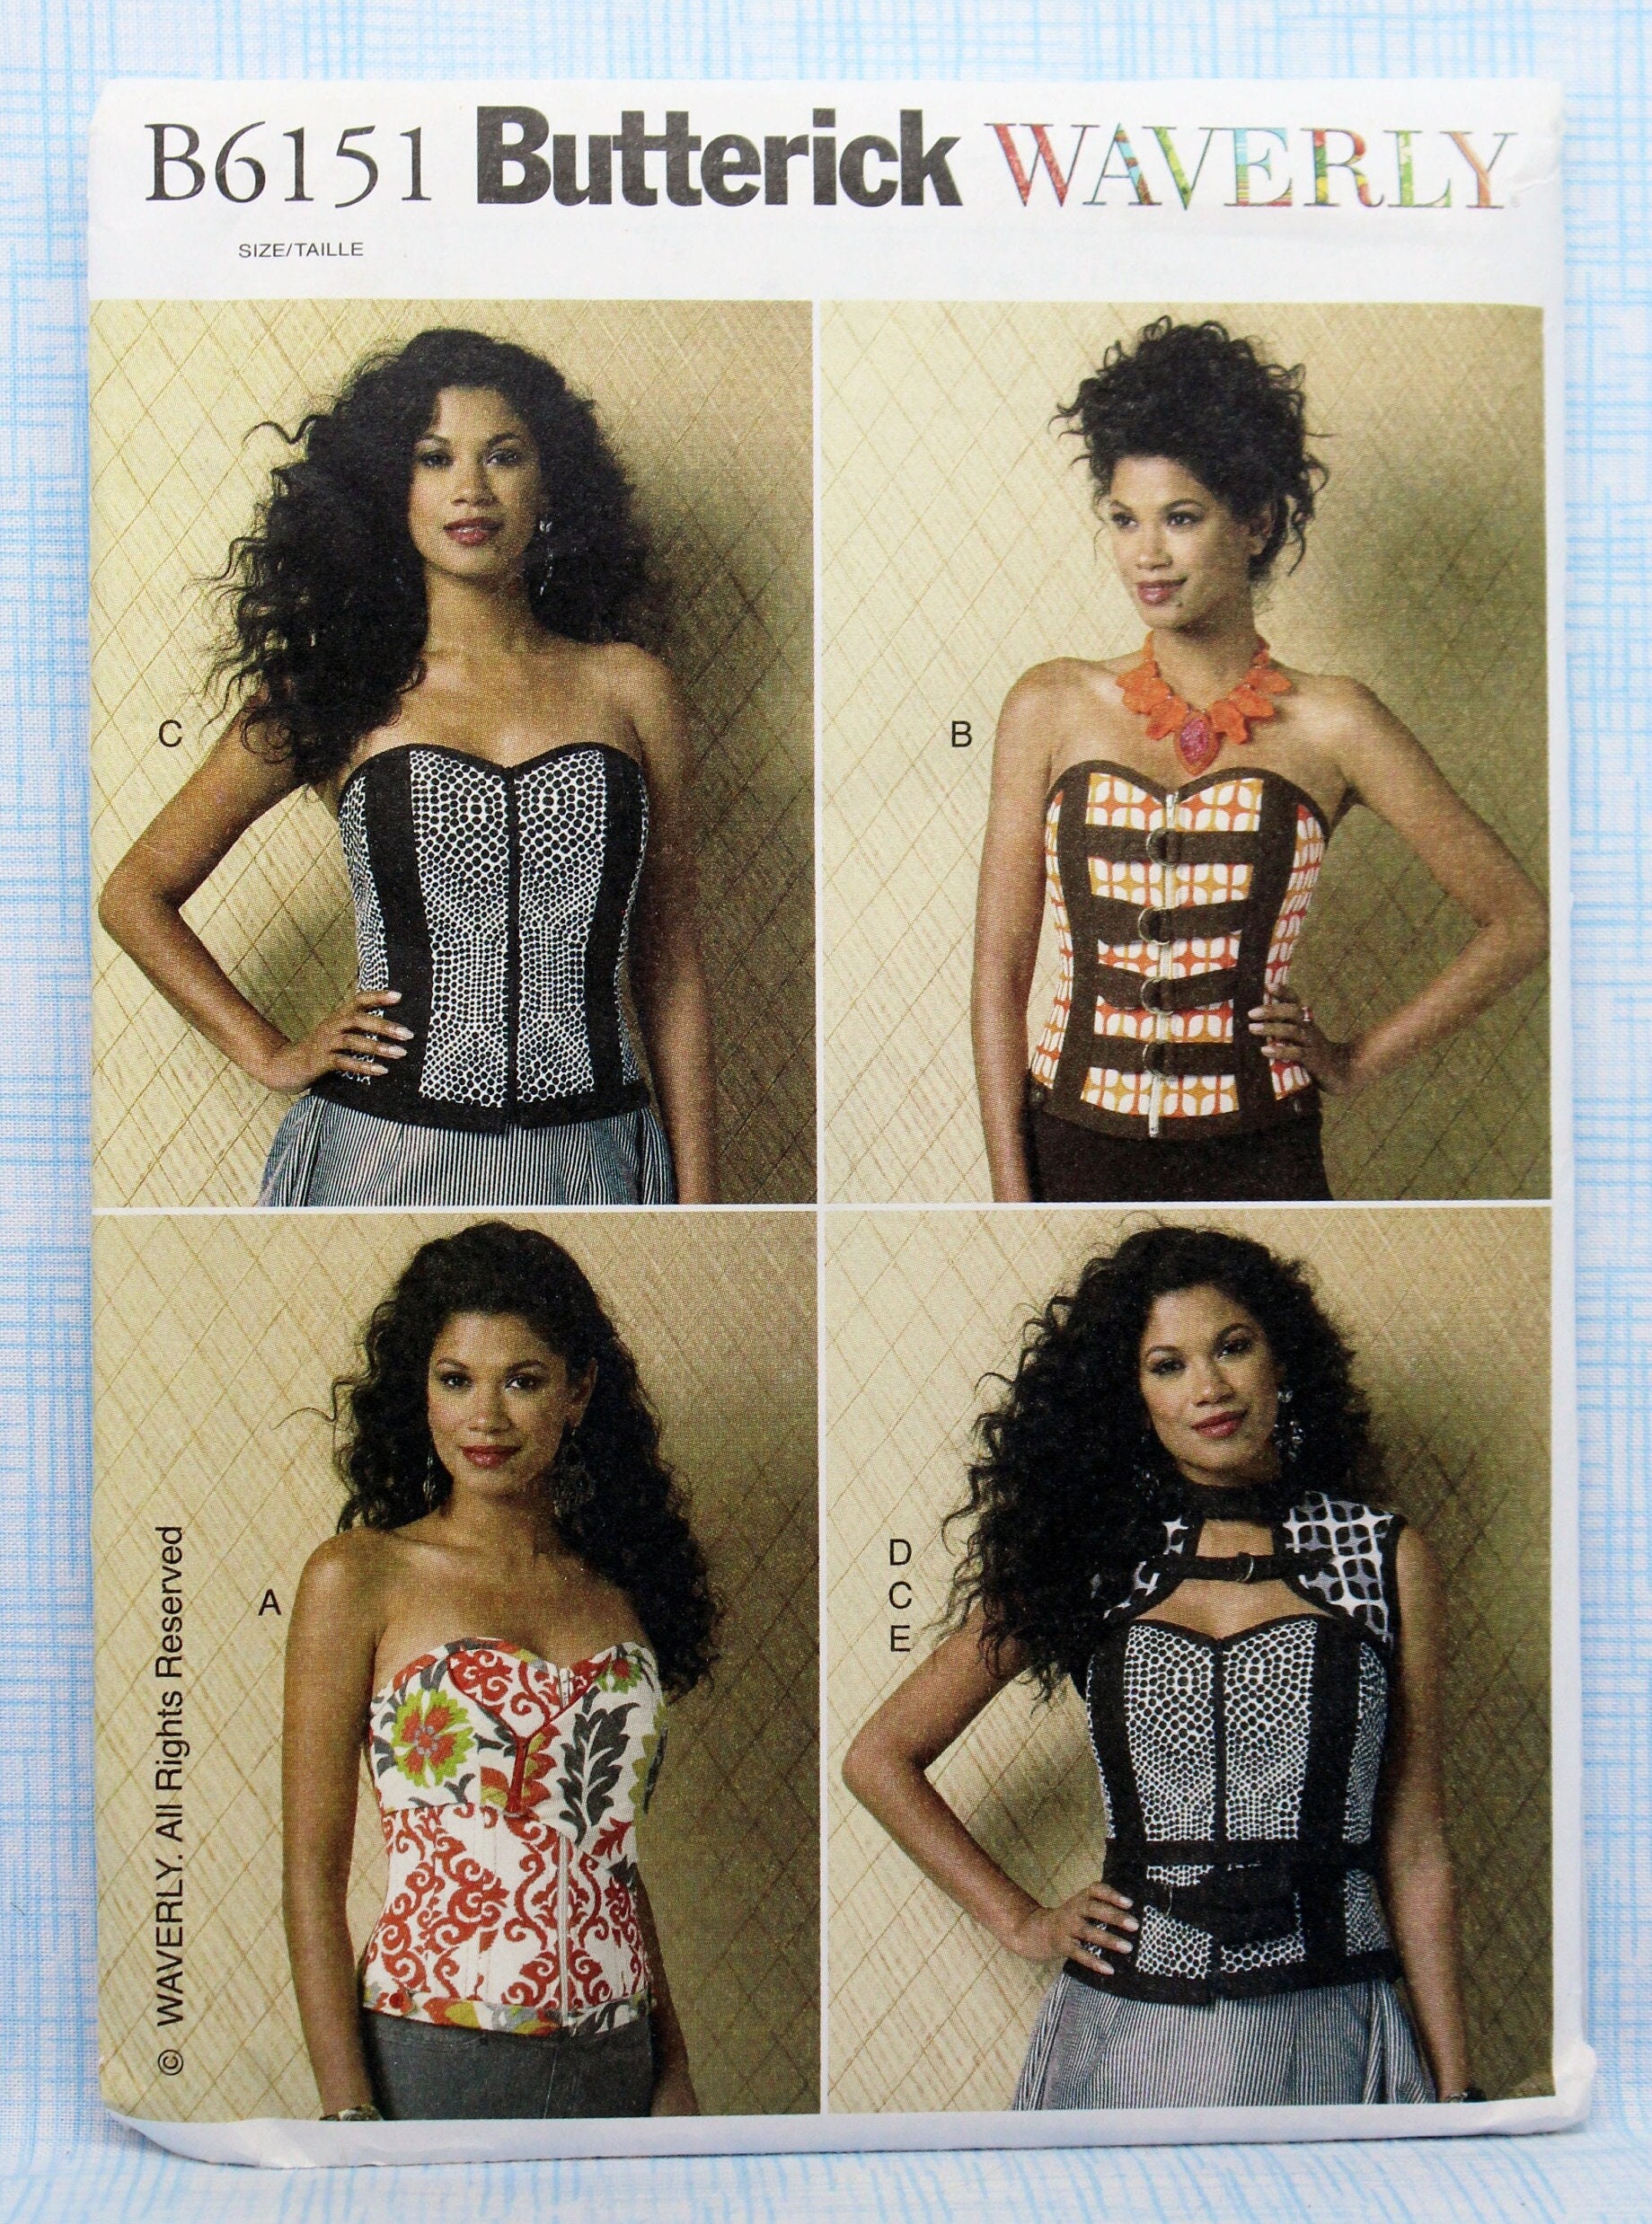 Sewing Pattern for Womens Boned Corset, Lace Front Corset Pattern, Lined  Corset, Peplum Corset, Butterick 4669, Size 6-12 and 14-20, Uncut 